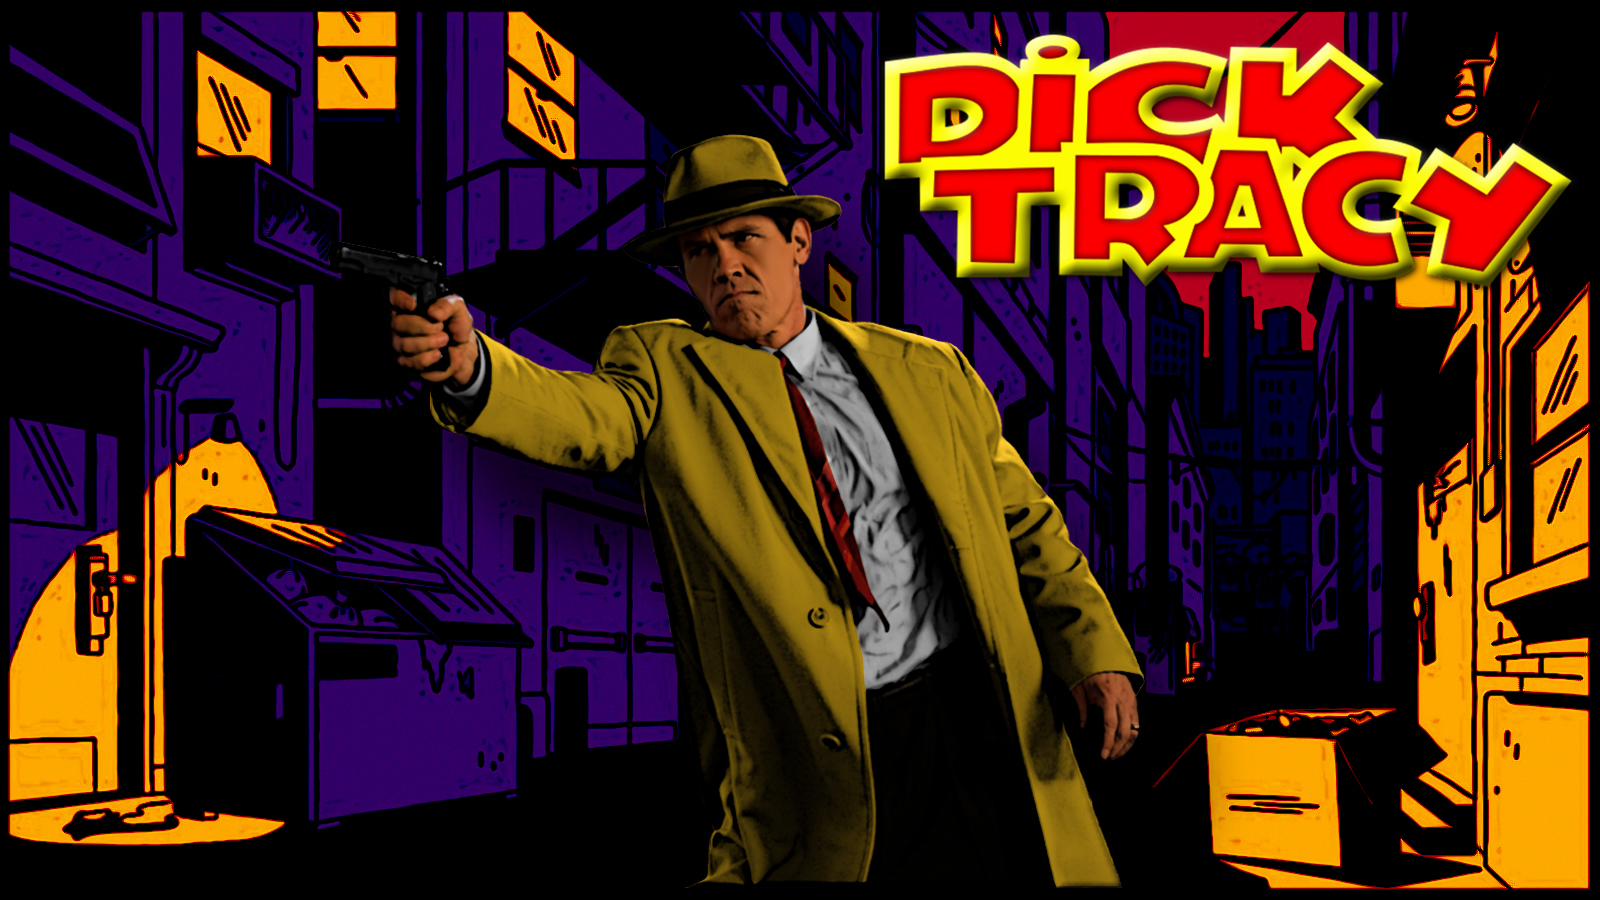 Free download dick tracy wp by swfan1977 customization wallpaper photo manipulated [1600x900] for your Desktop, Mobile & Tablet. Explore Cock Wallpaper. Cock Wallpaper, Cock Wallpaper